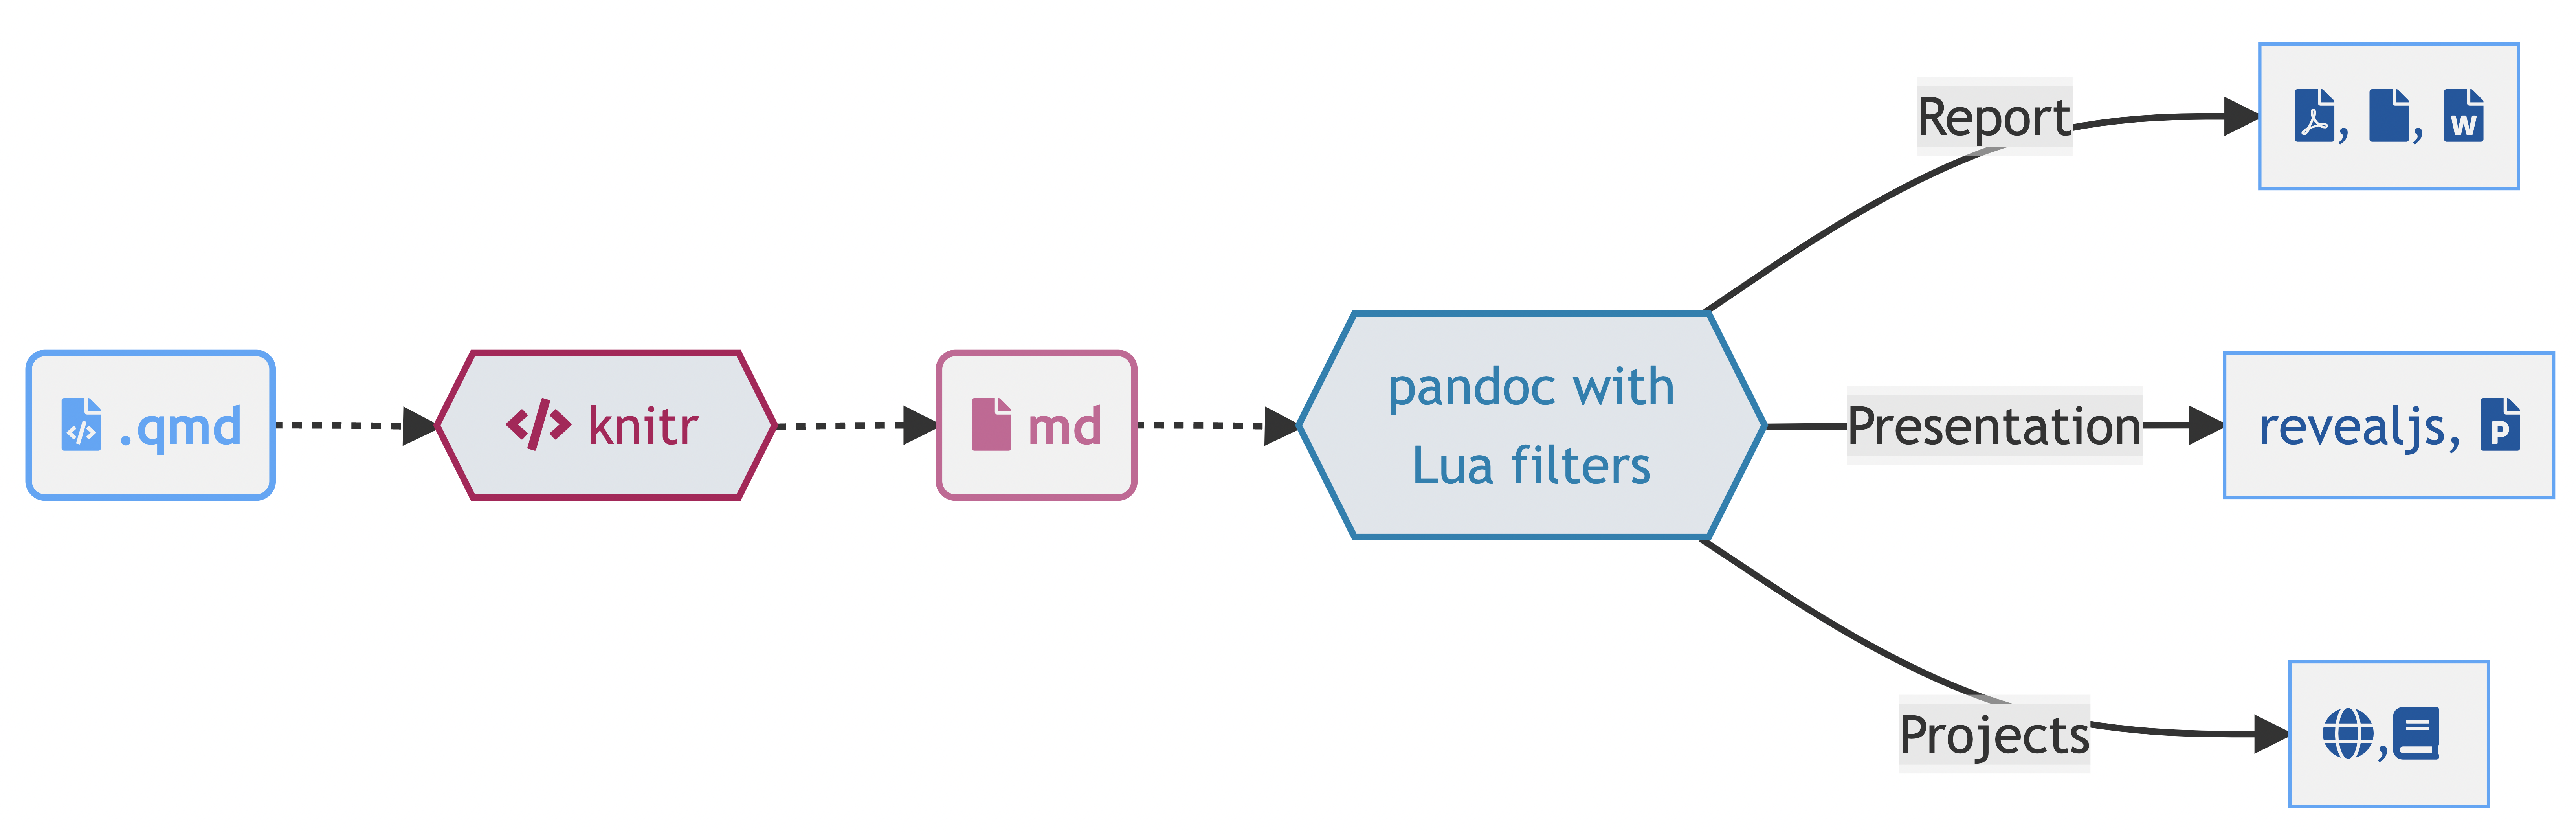 diagram of converting a Qmd document via knitr/pandoc into markdown and then into output formats